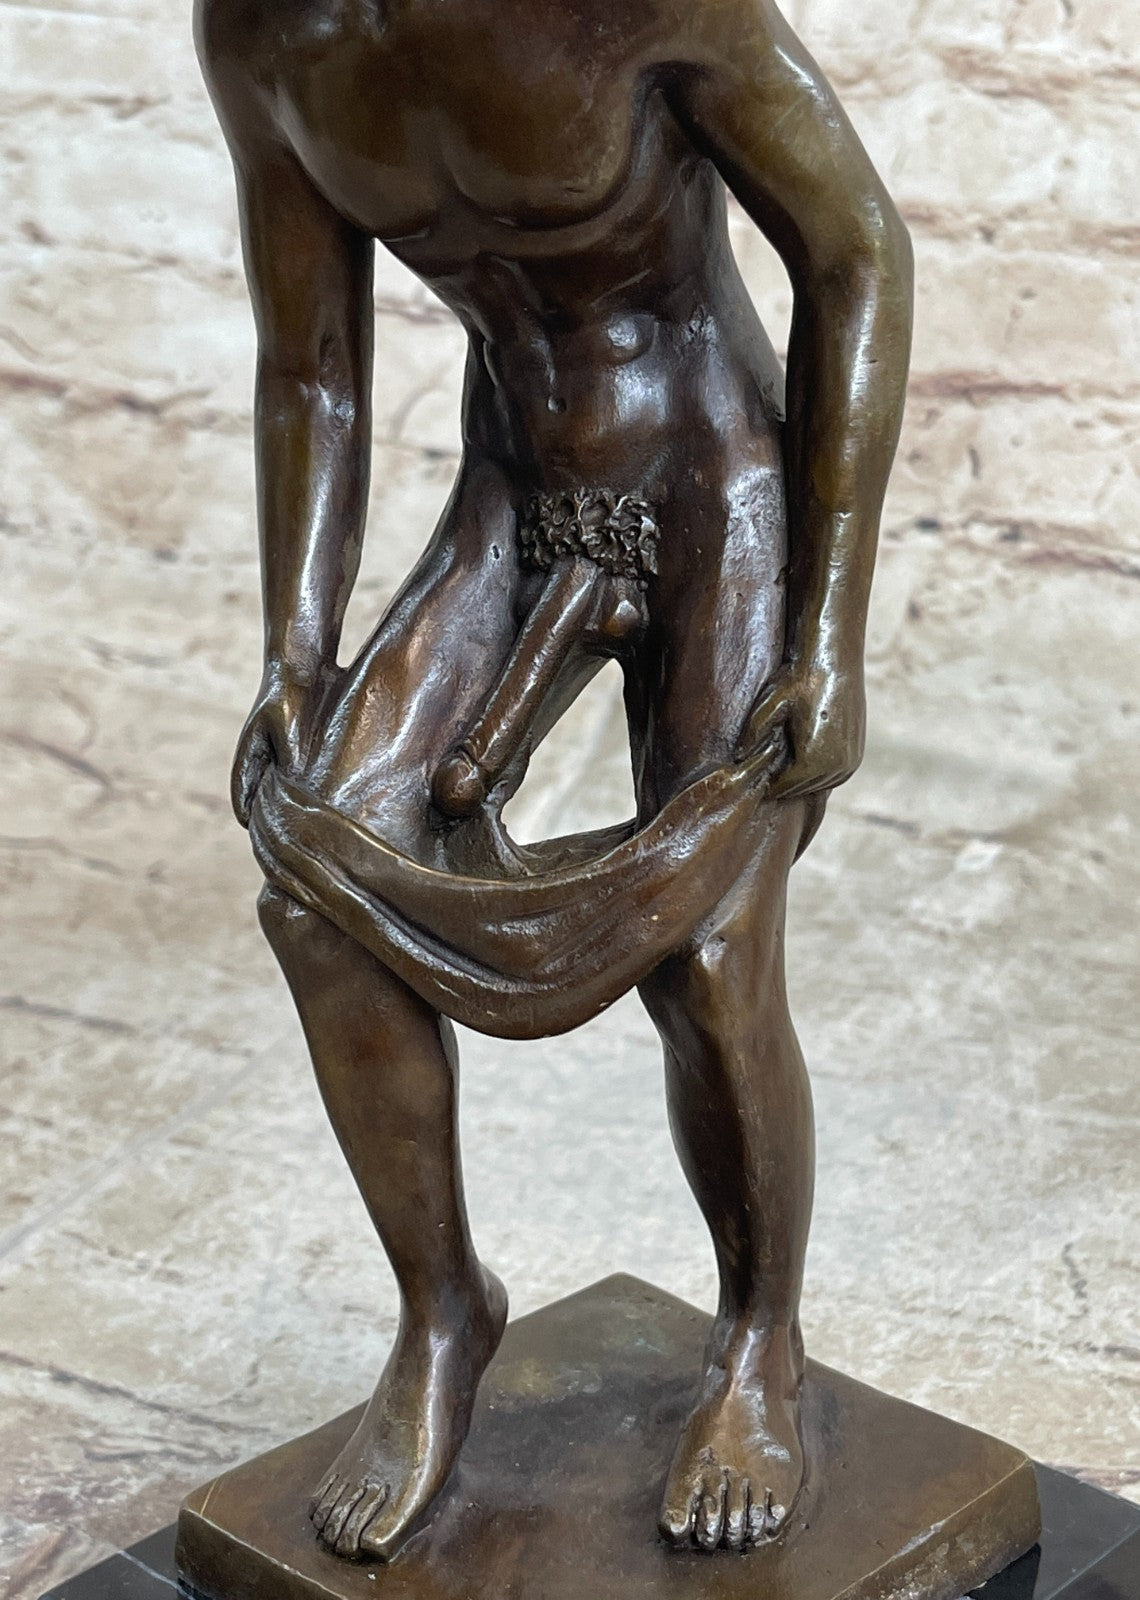 EROTIC STANDING NAKED MALE NUDE GAY GIFT BRONZE FIGURINE STATUE - NEW DECOR SALE